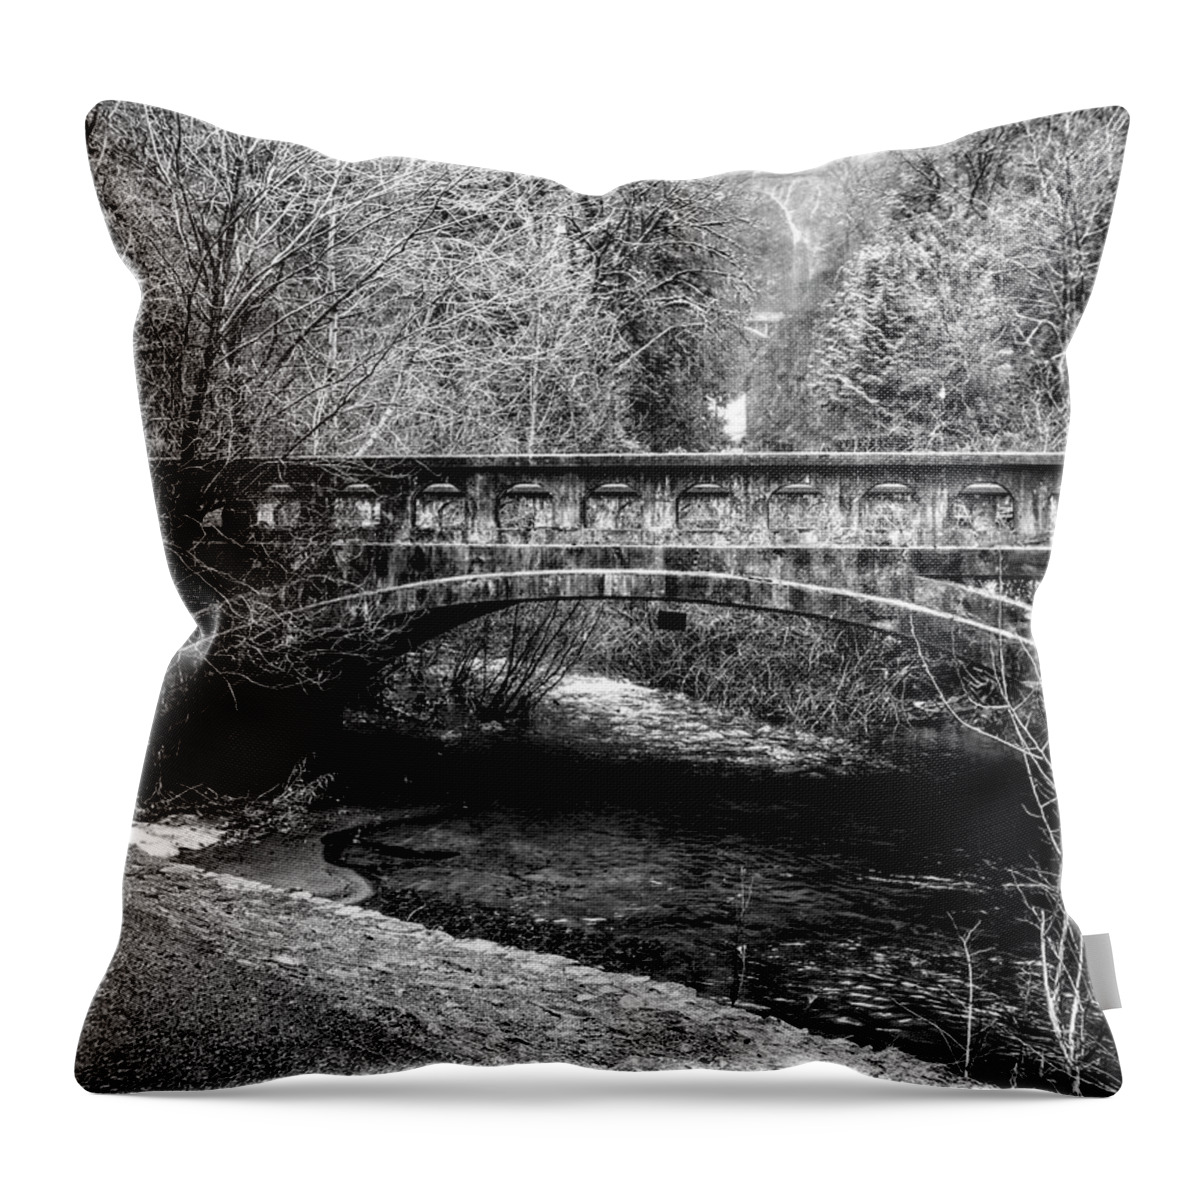 Rebecca Dru Throw Pillow featuring the photograph A Peaceful Moment at Columbia Gorge by Rebecca Dru